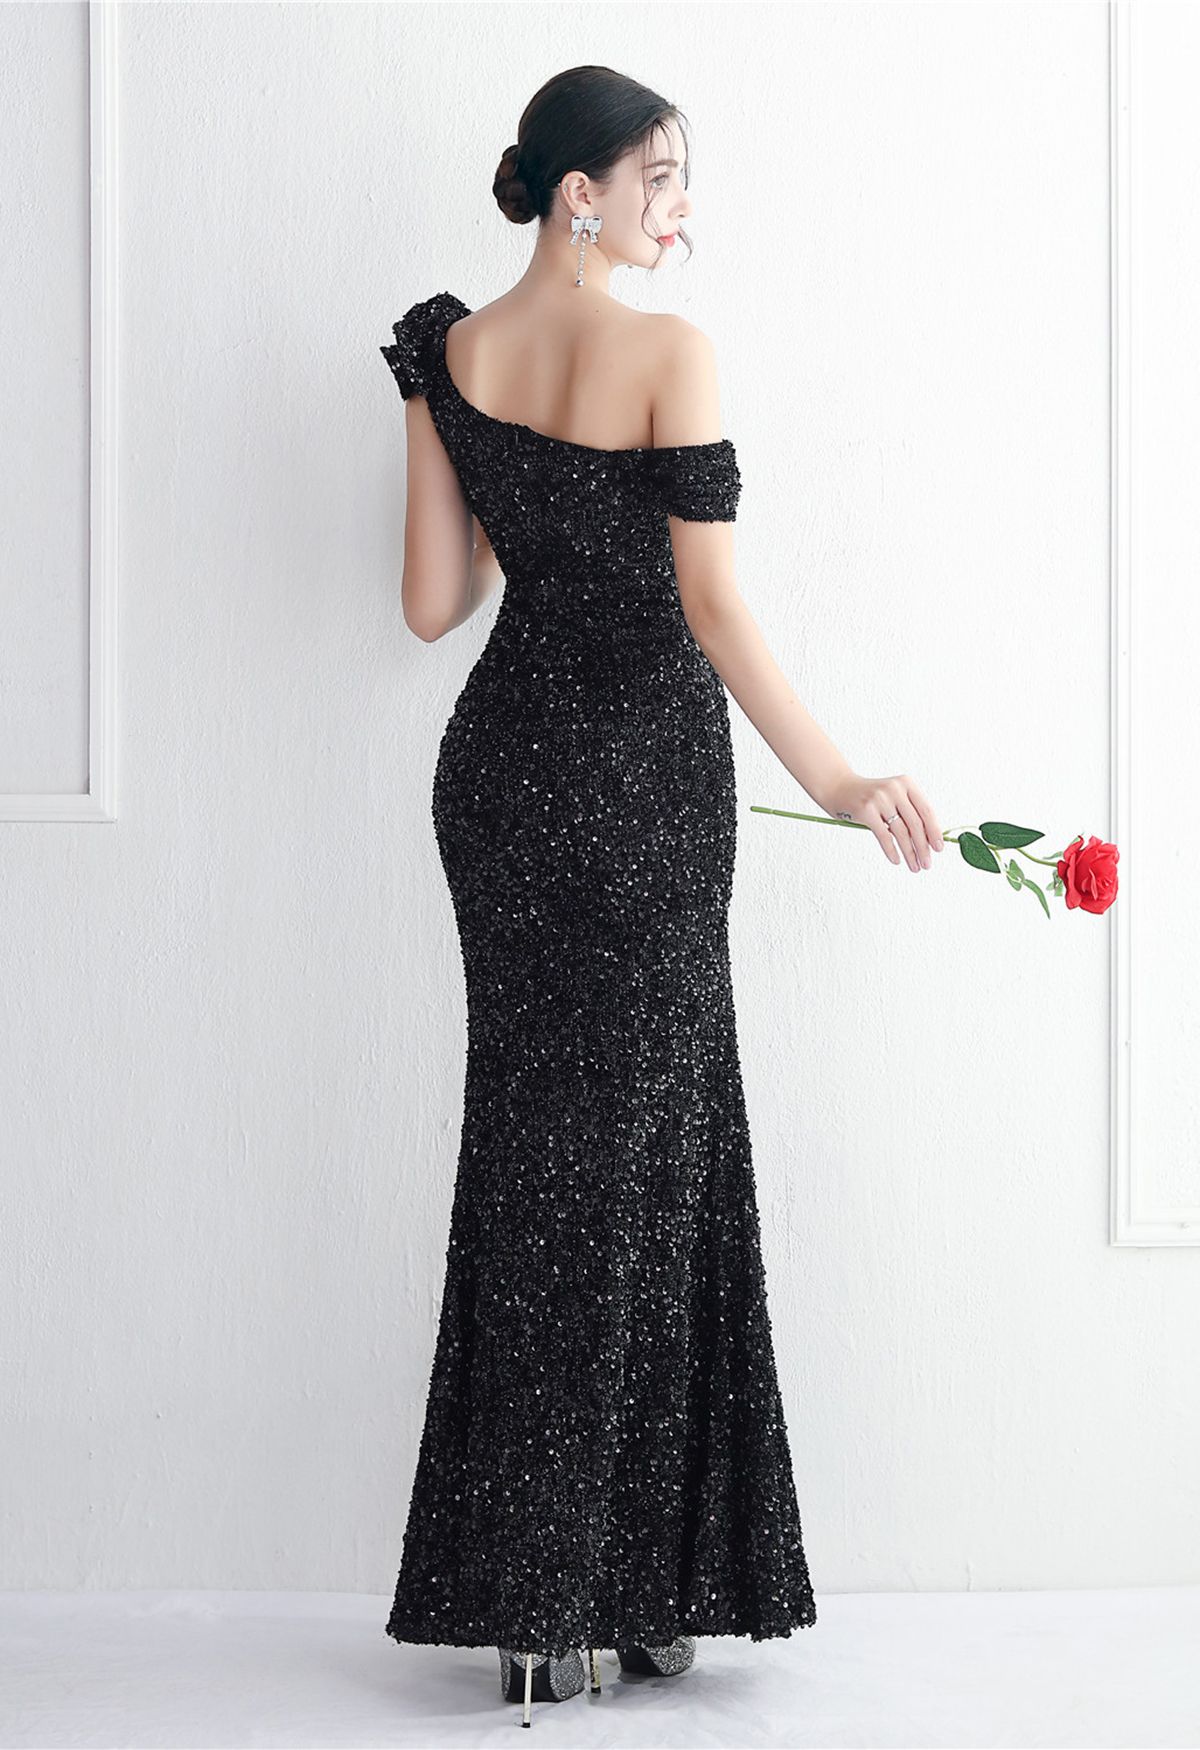 Tiered Ruffle One Shoulder Sequin Slit Gown in Black